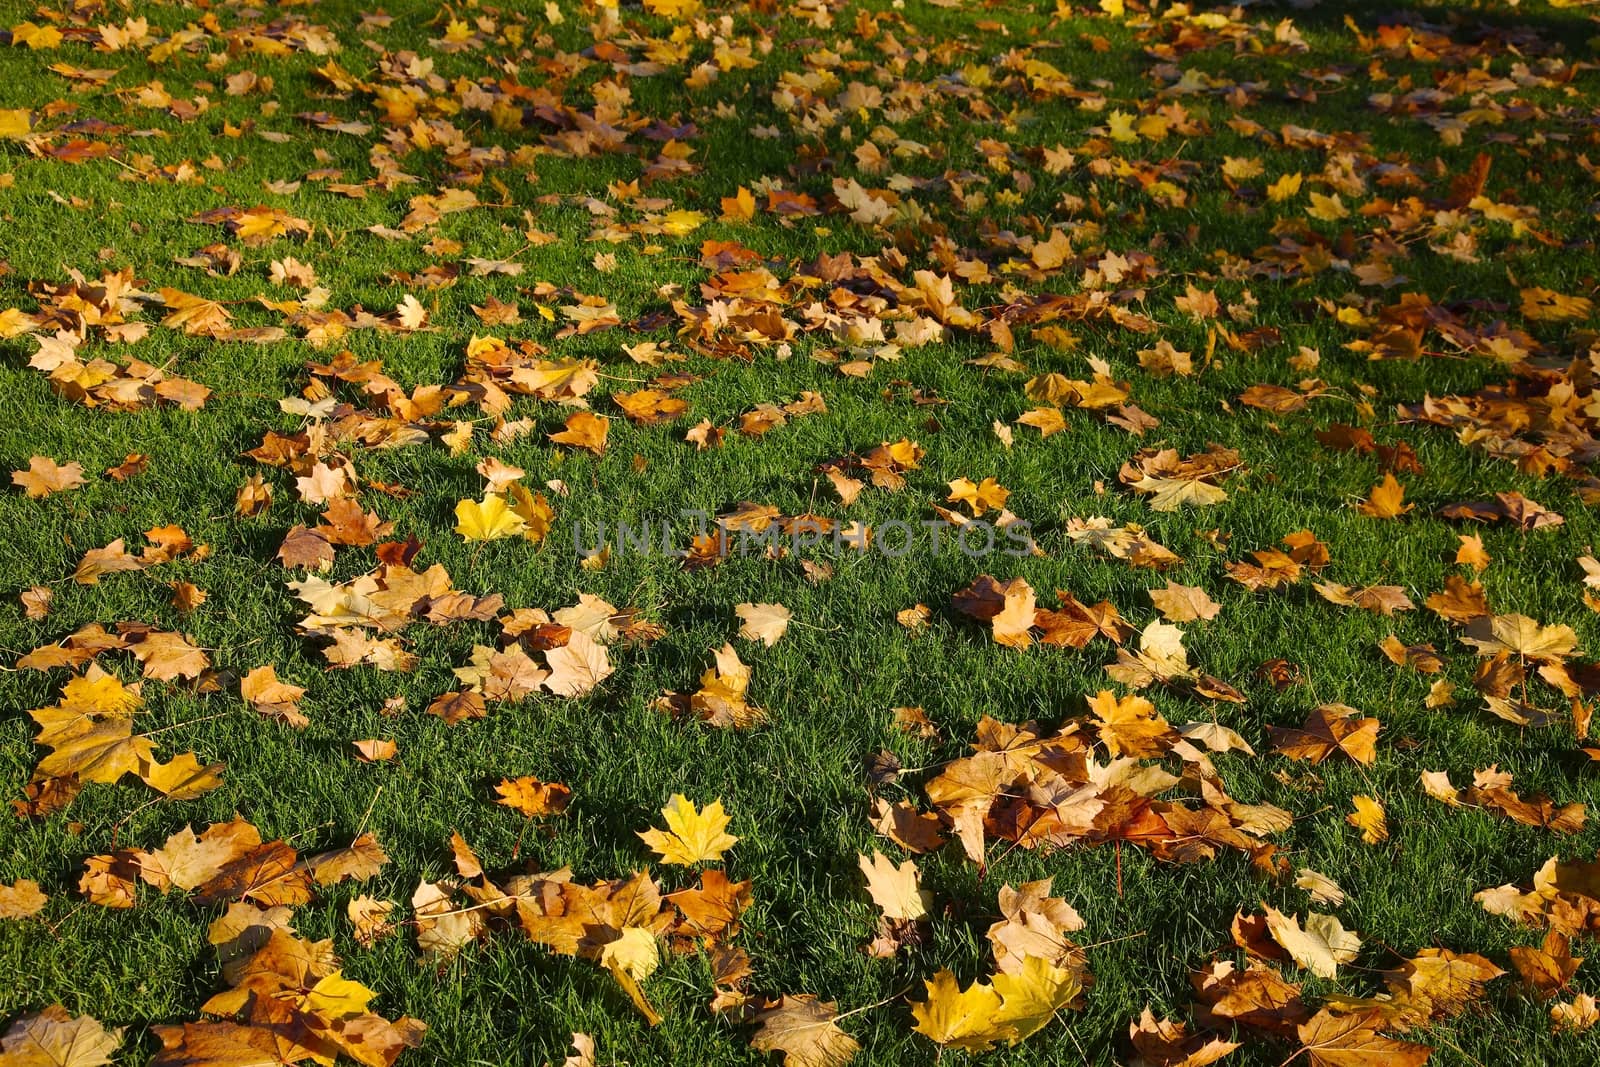 Fallen leaves on the grass